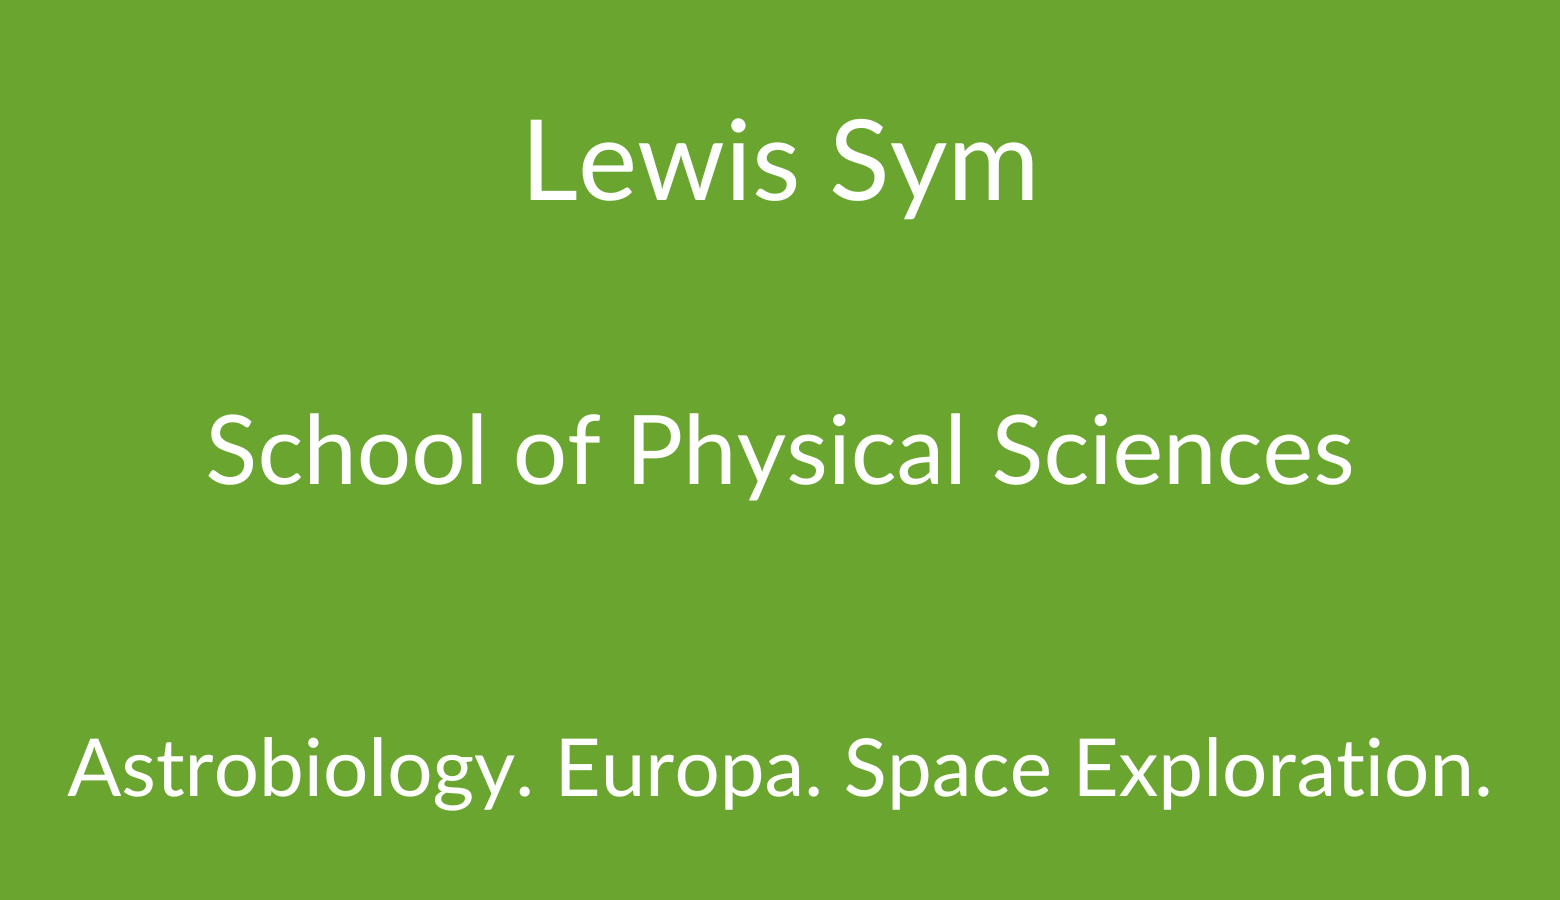 Lewis Sym. School of Physical Sciences. Astrobiology. Europa. Space Exploration.